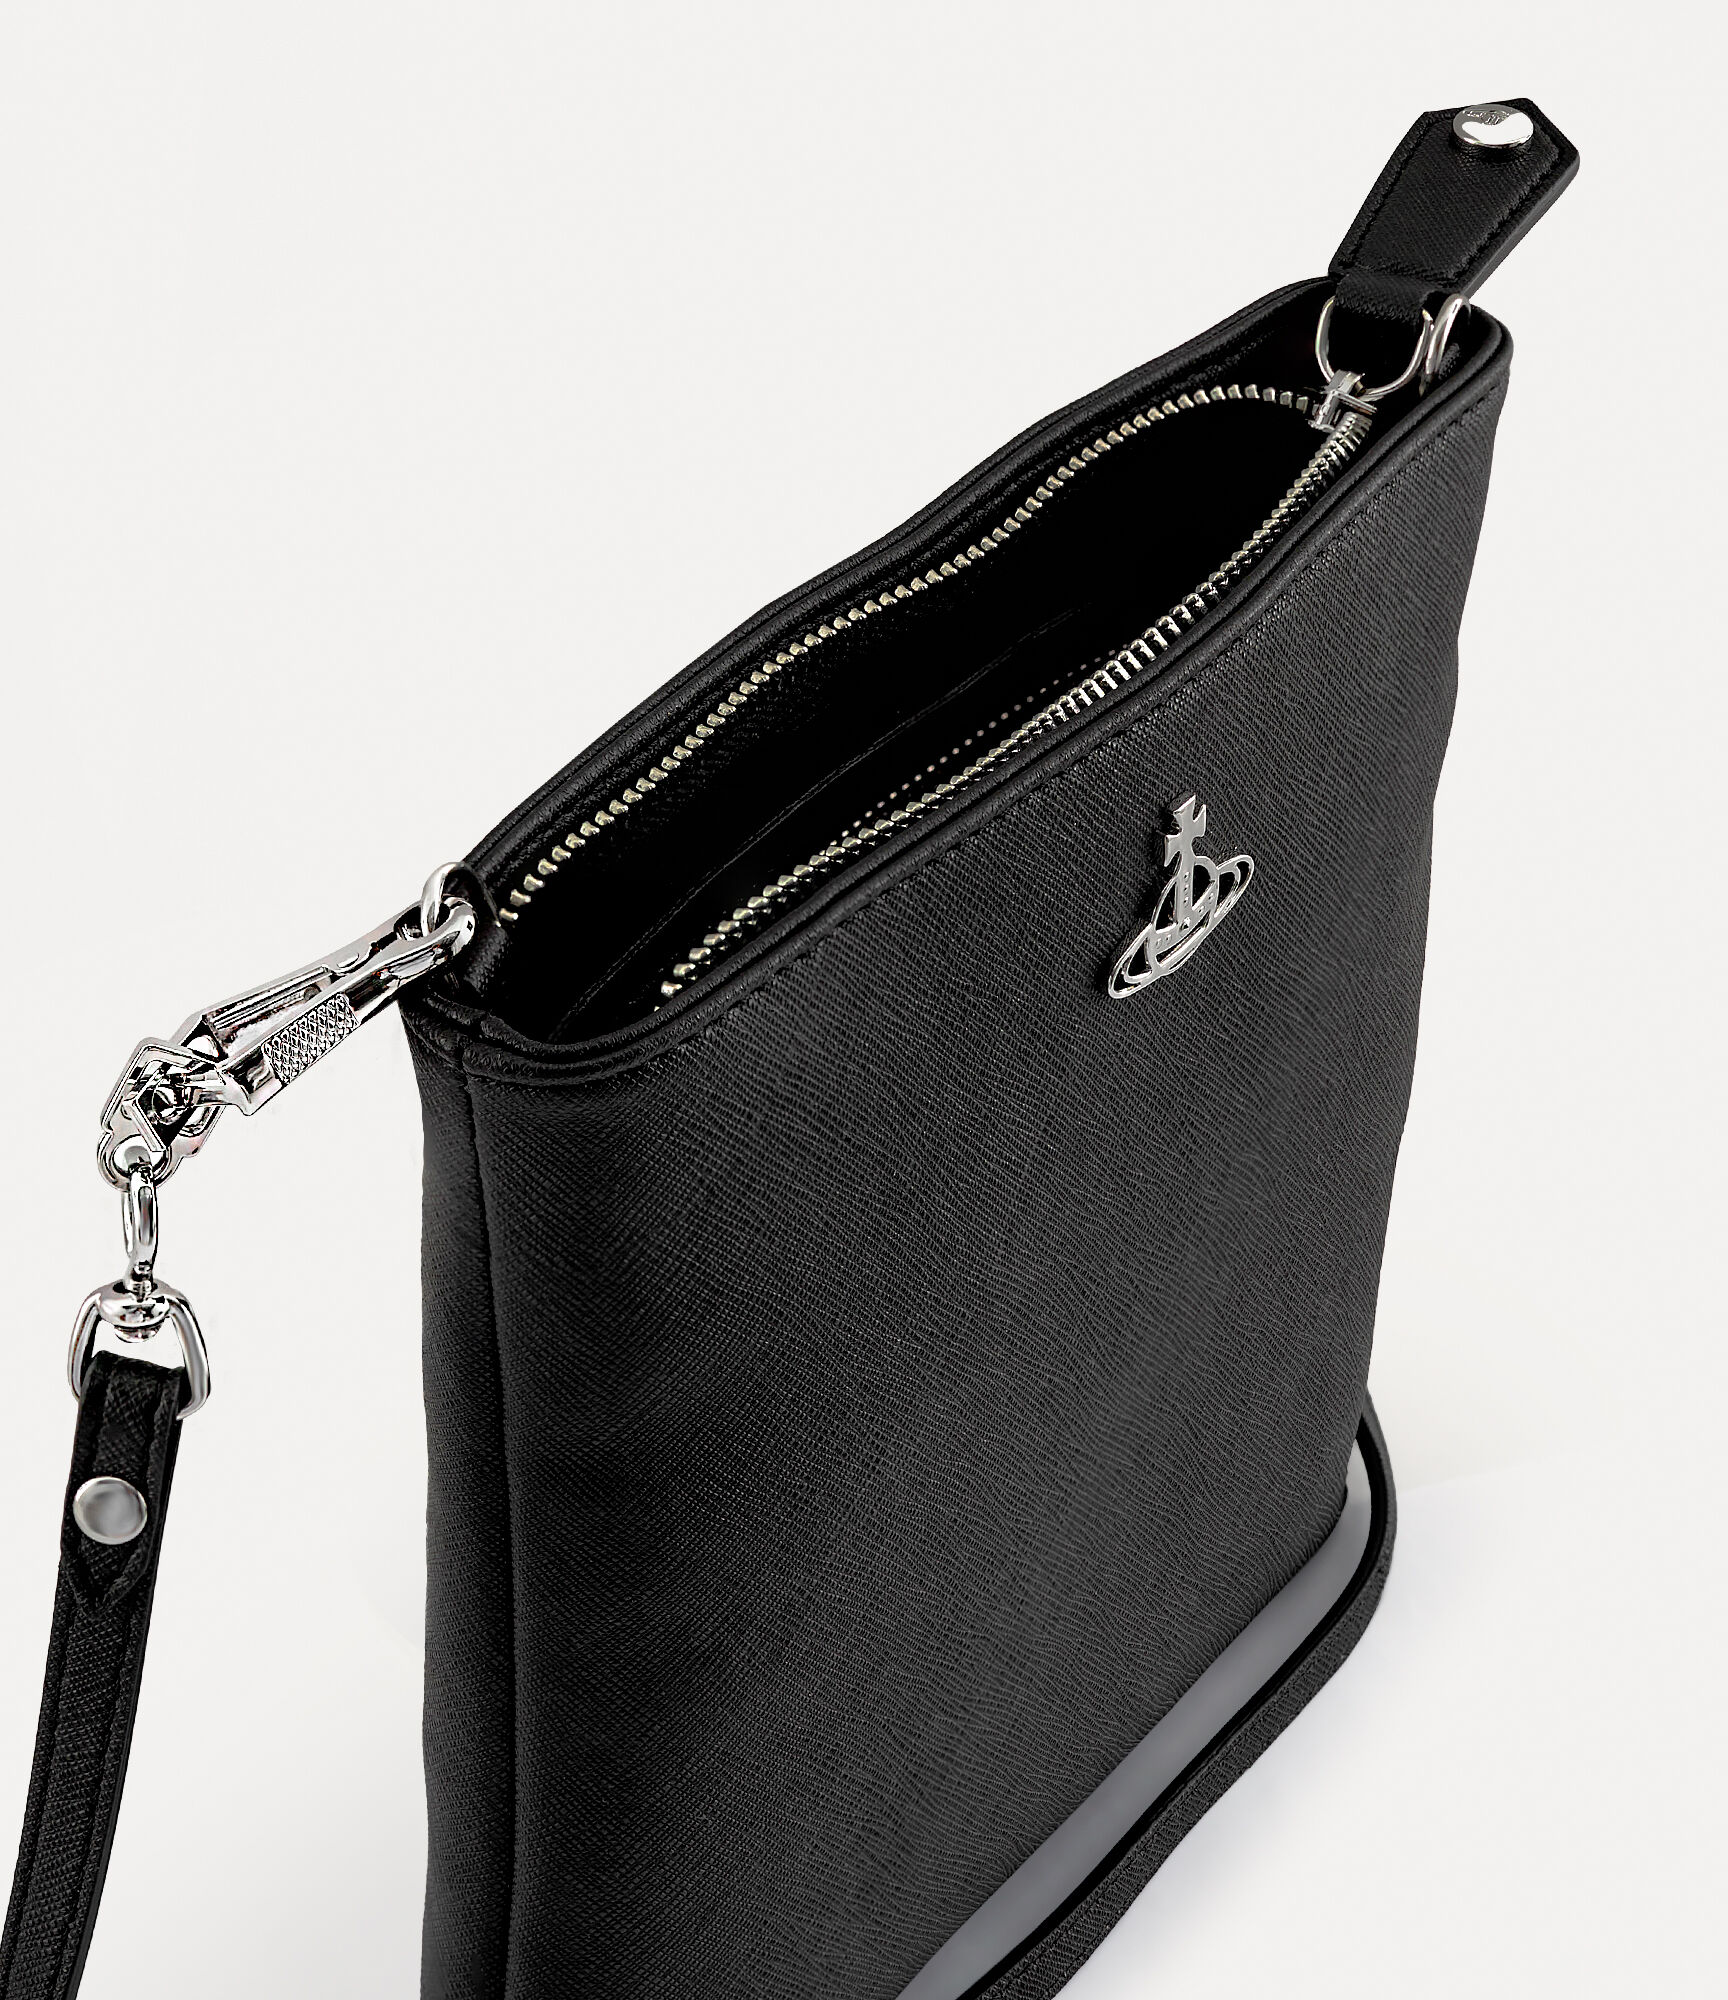 Squire New Square Crossbody Bag in black | Vivienne Westwood®